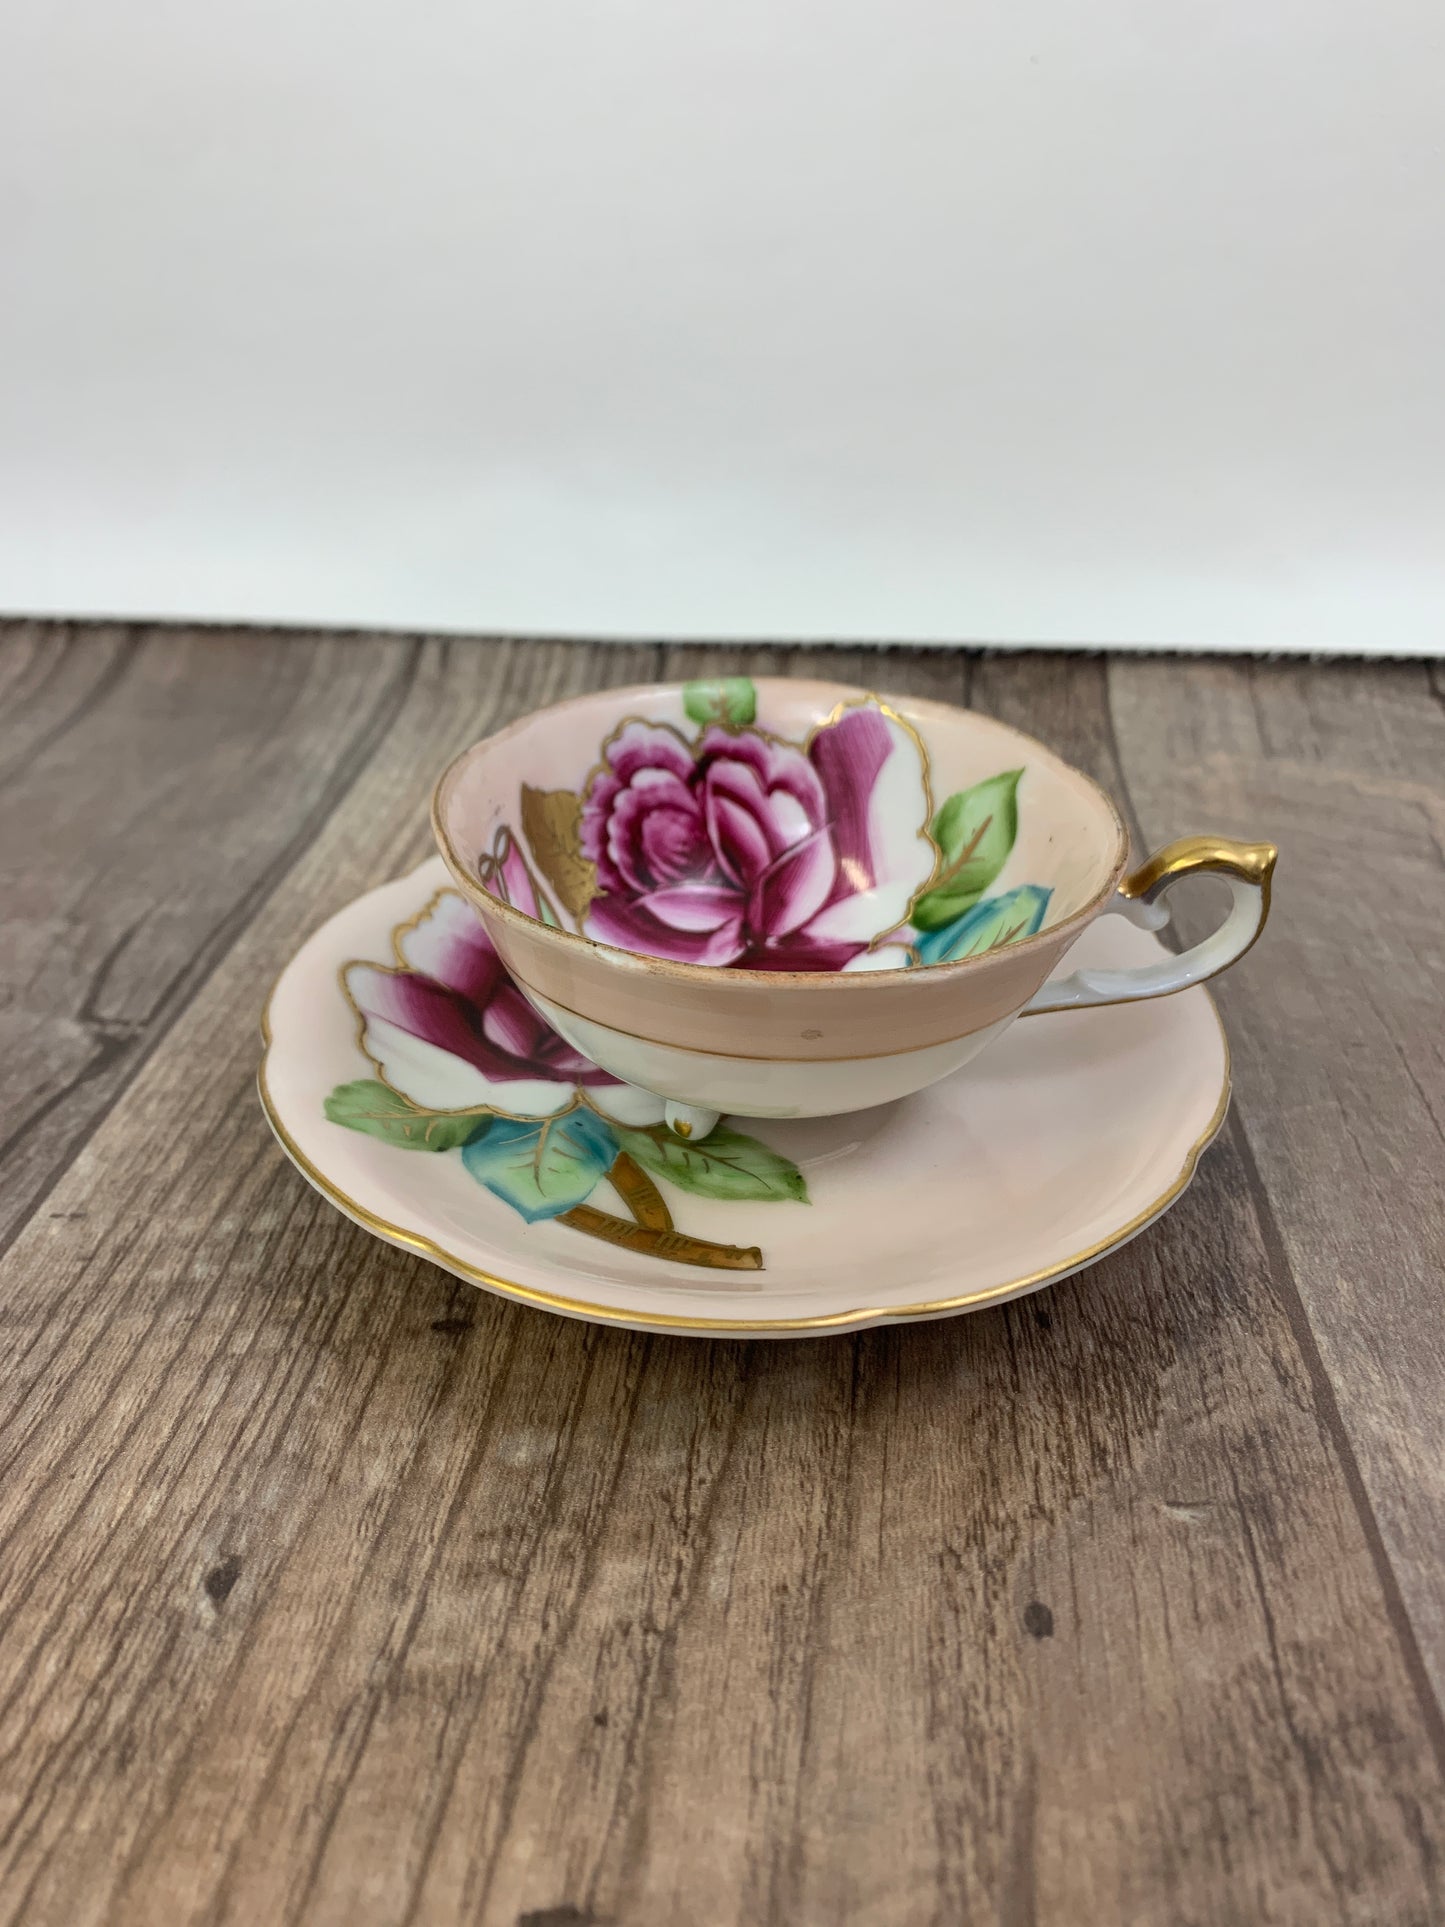 Trimont China Hand Painted Demi Tasse Cup Hand Painted Teacup and Saucer Hand Painted Pink Teacup